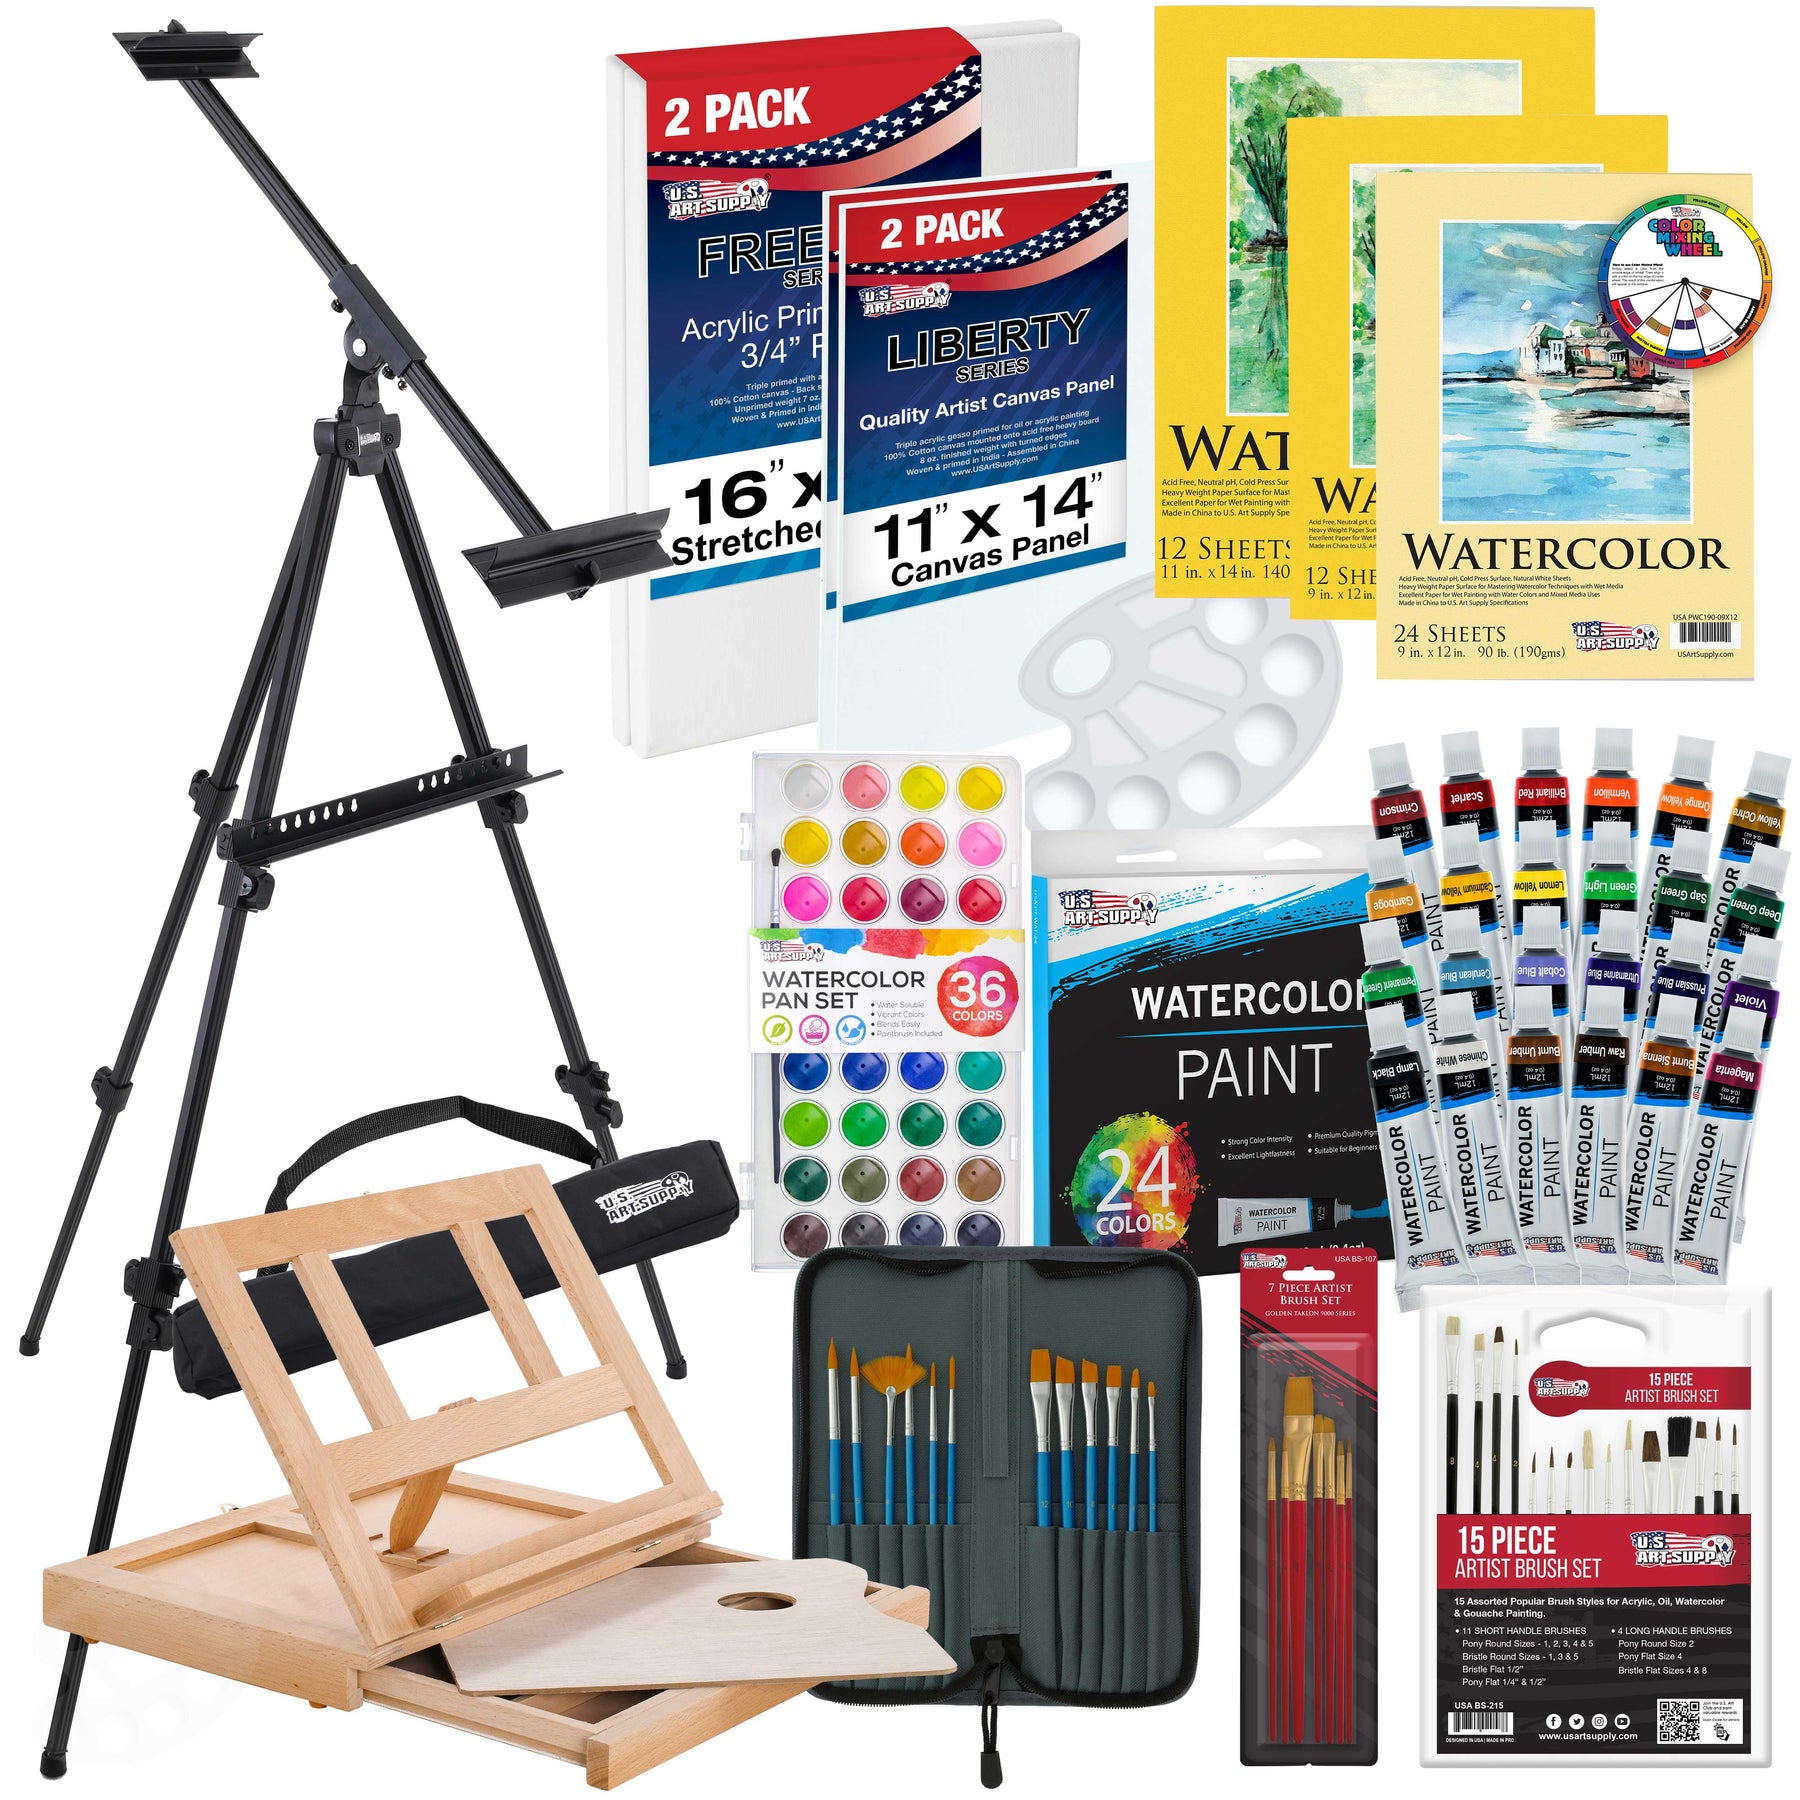  U.S. Art Supply 70-Piece Artist Oil Painting Set with Aluminum  Field Easel, Wood Table Easel, 24 Oil Paint Colors, 37 Brushes, 2 Stretched  Canvases, 6 Canvas Panels, Oil Painting Pad, Palette & More